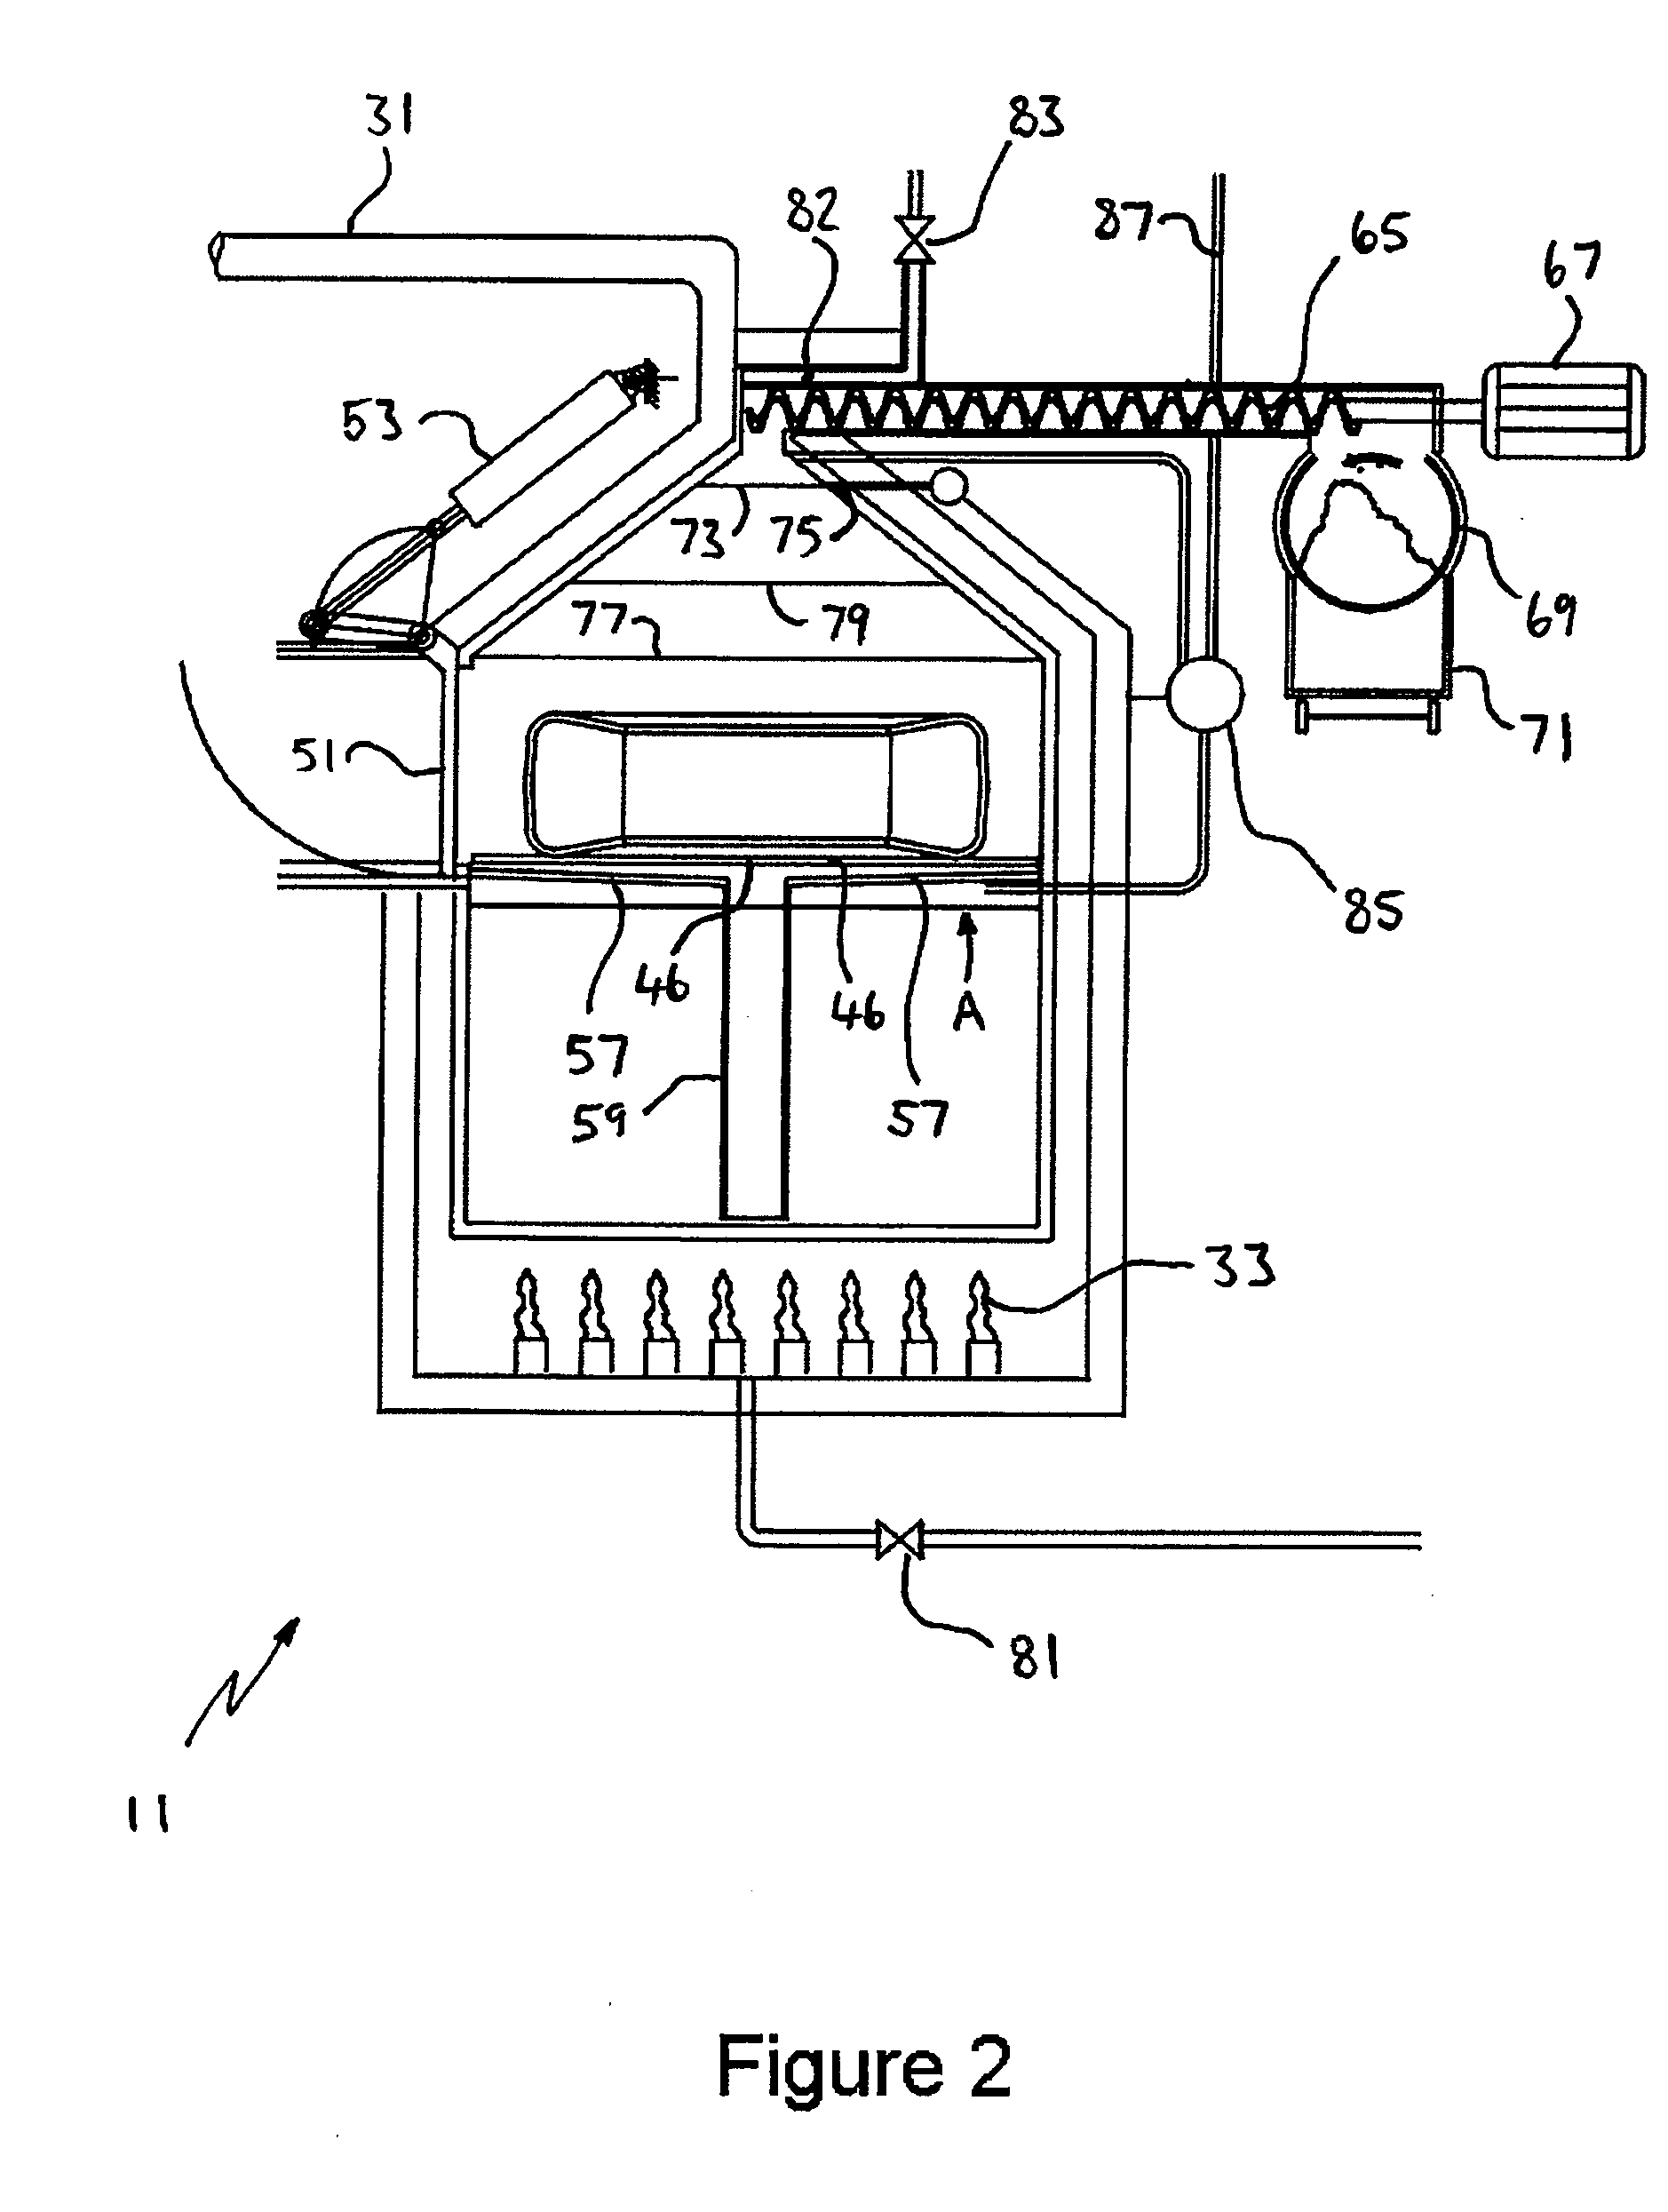 Process and apparatus for decomposition of polymer products including those containing sulphur such as vulcanised rubber tyres and recovery of resources therefrom